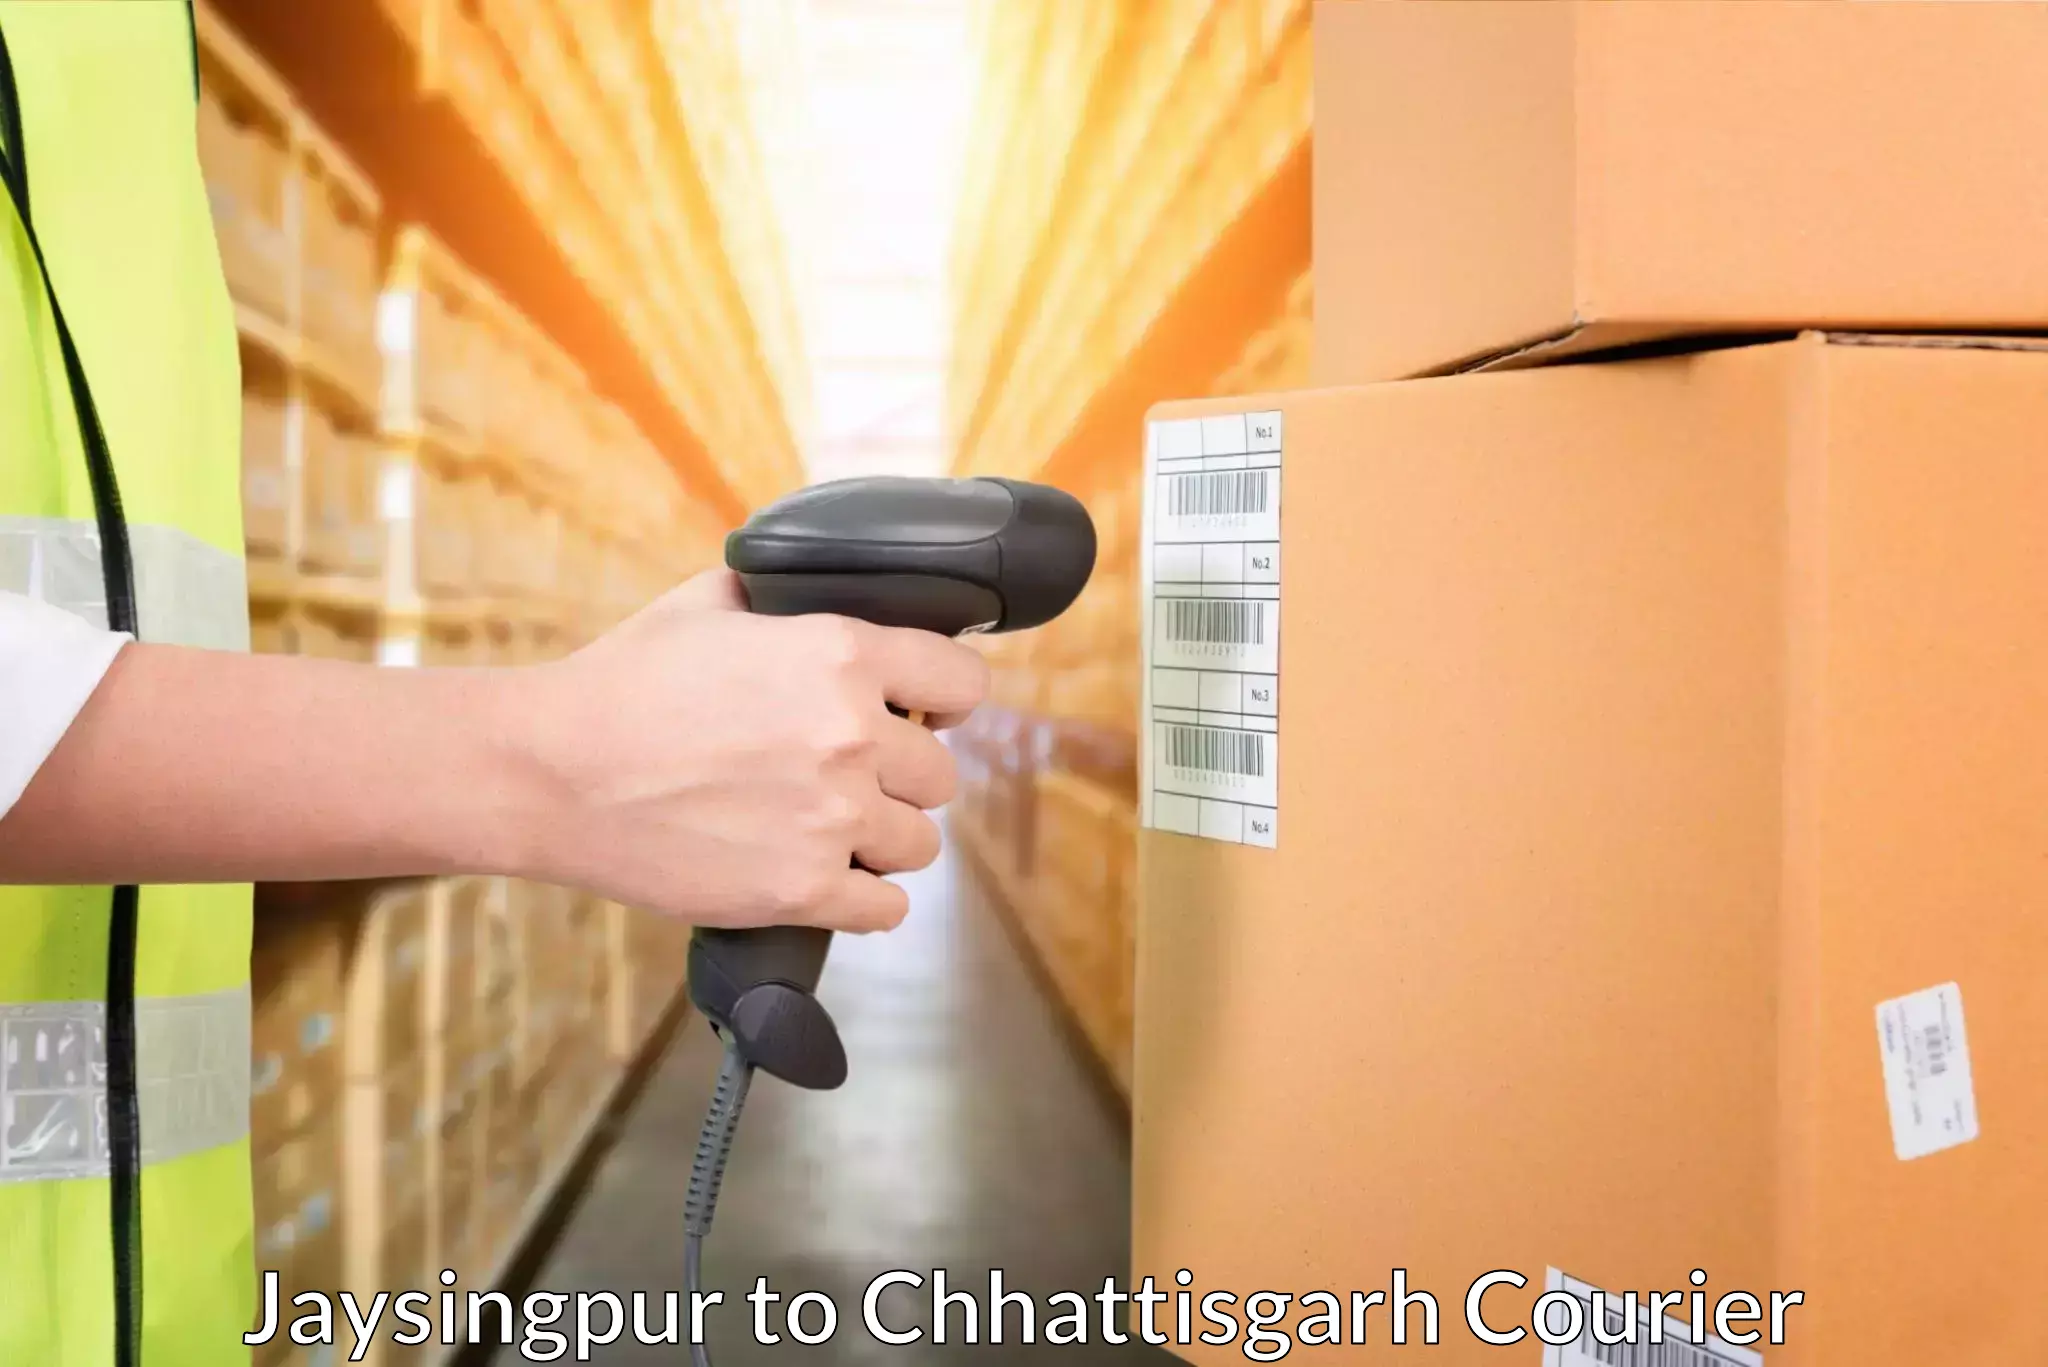 Personalized courier experiences Jaysingpur to Chhattisgarh